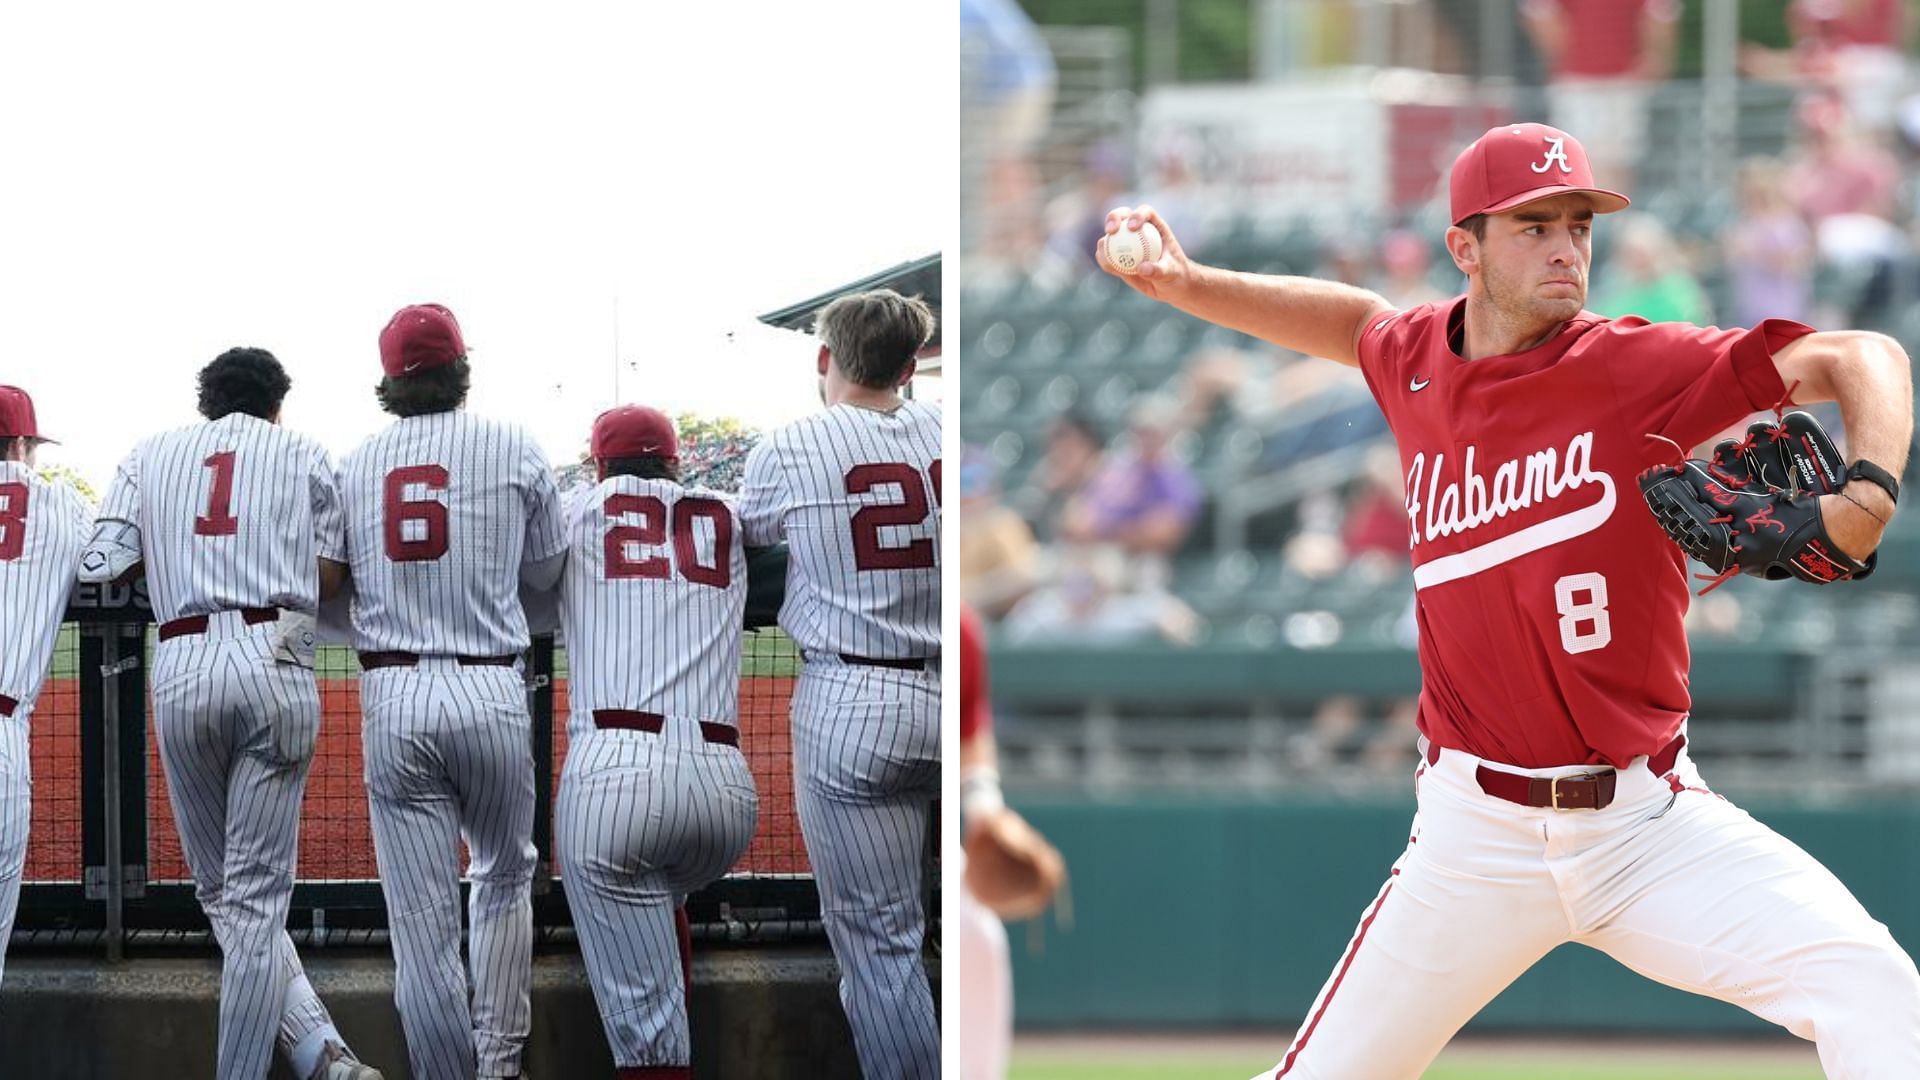 The Alabama Crimson Tide are in an interesting spot for the NCAA Tournament